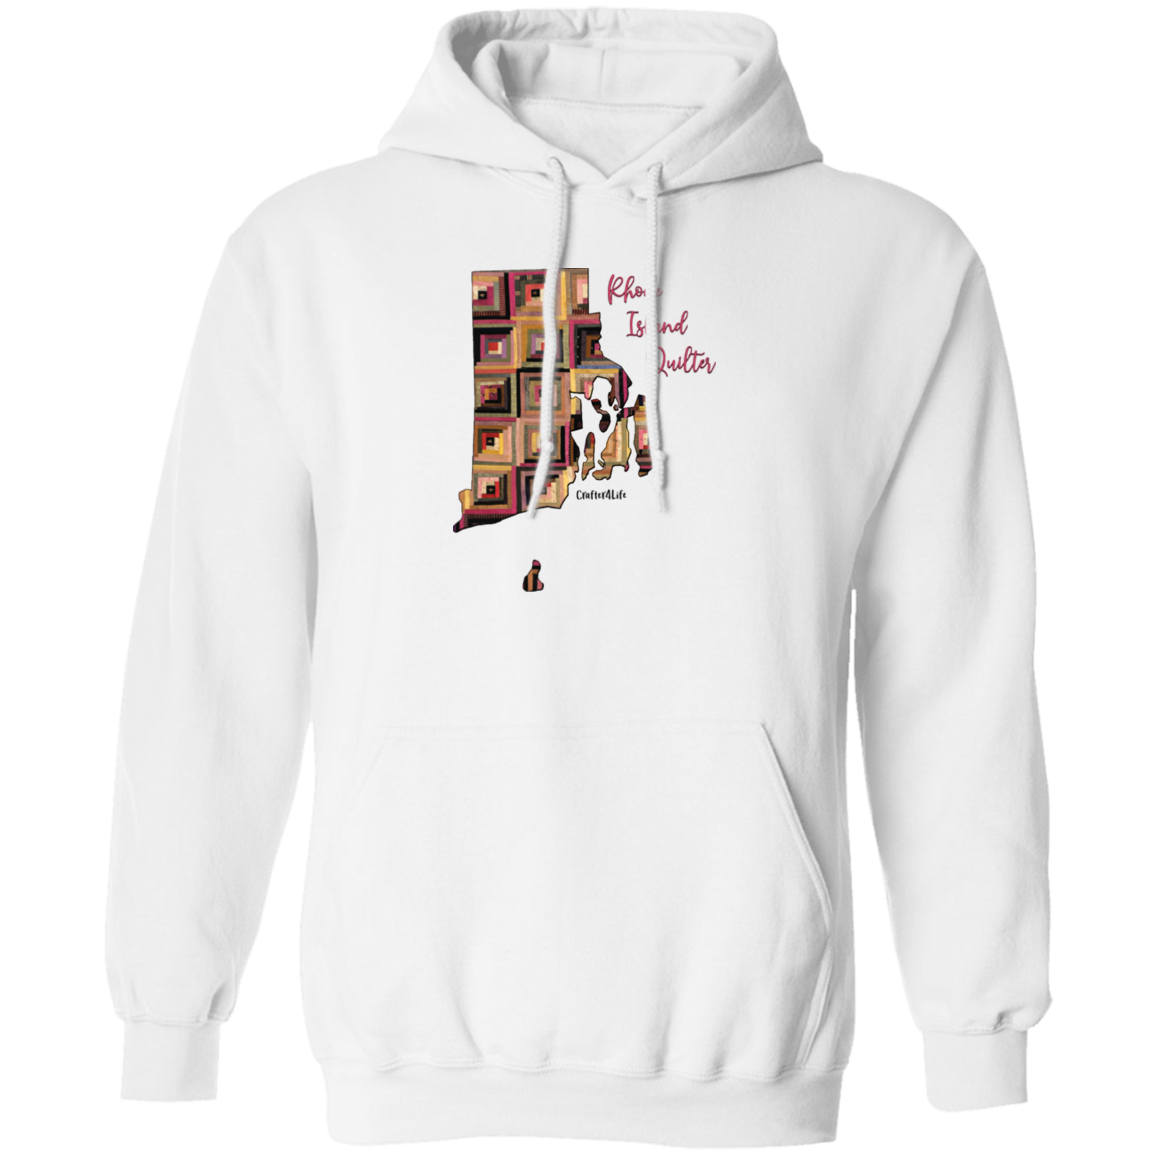 Rhode Island Quilter Pullover Hoodie, Gift for Quilting Friends and Family